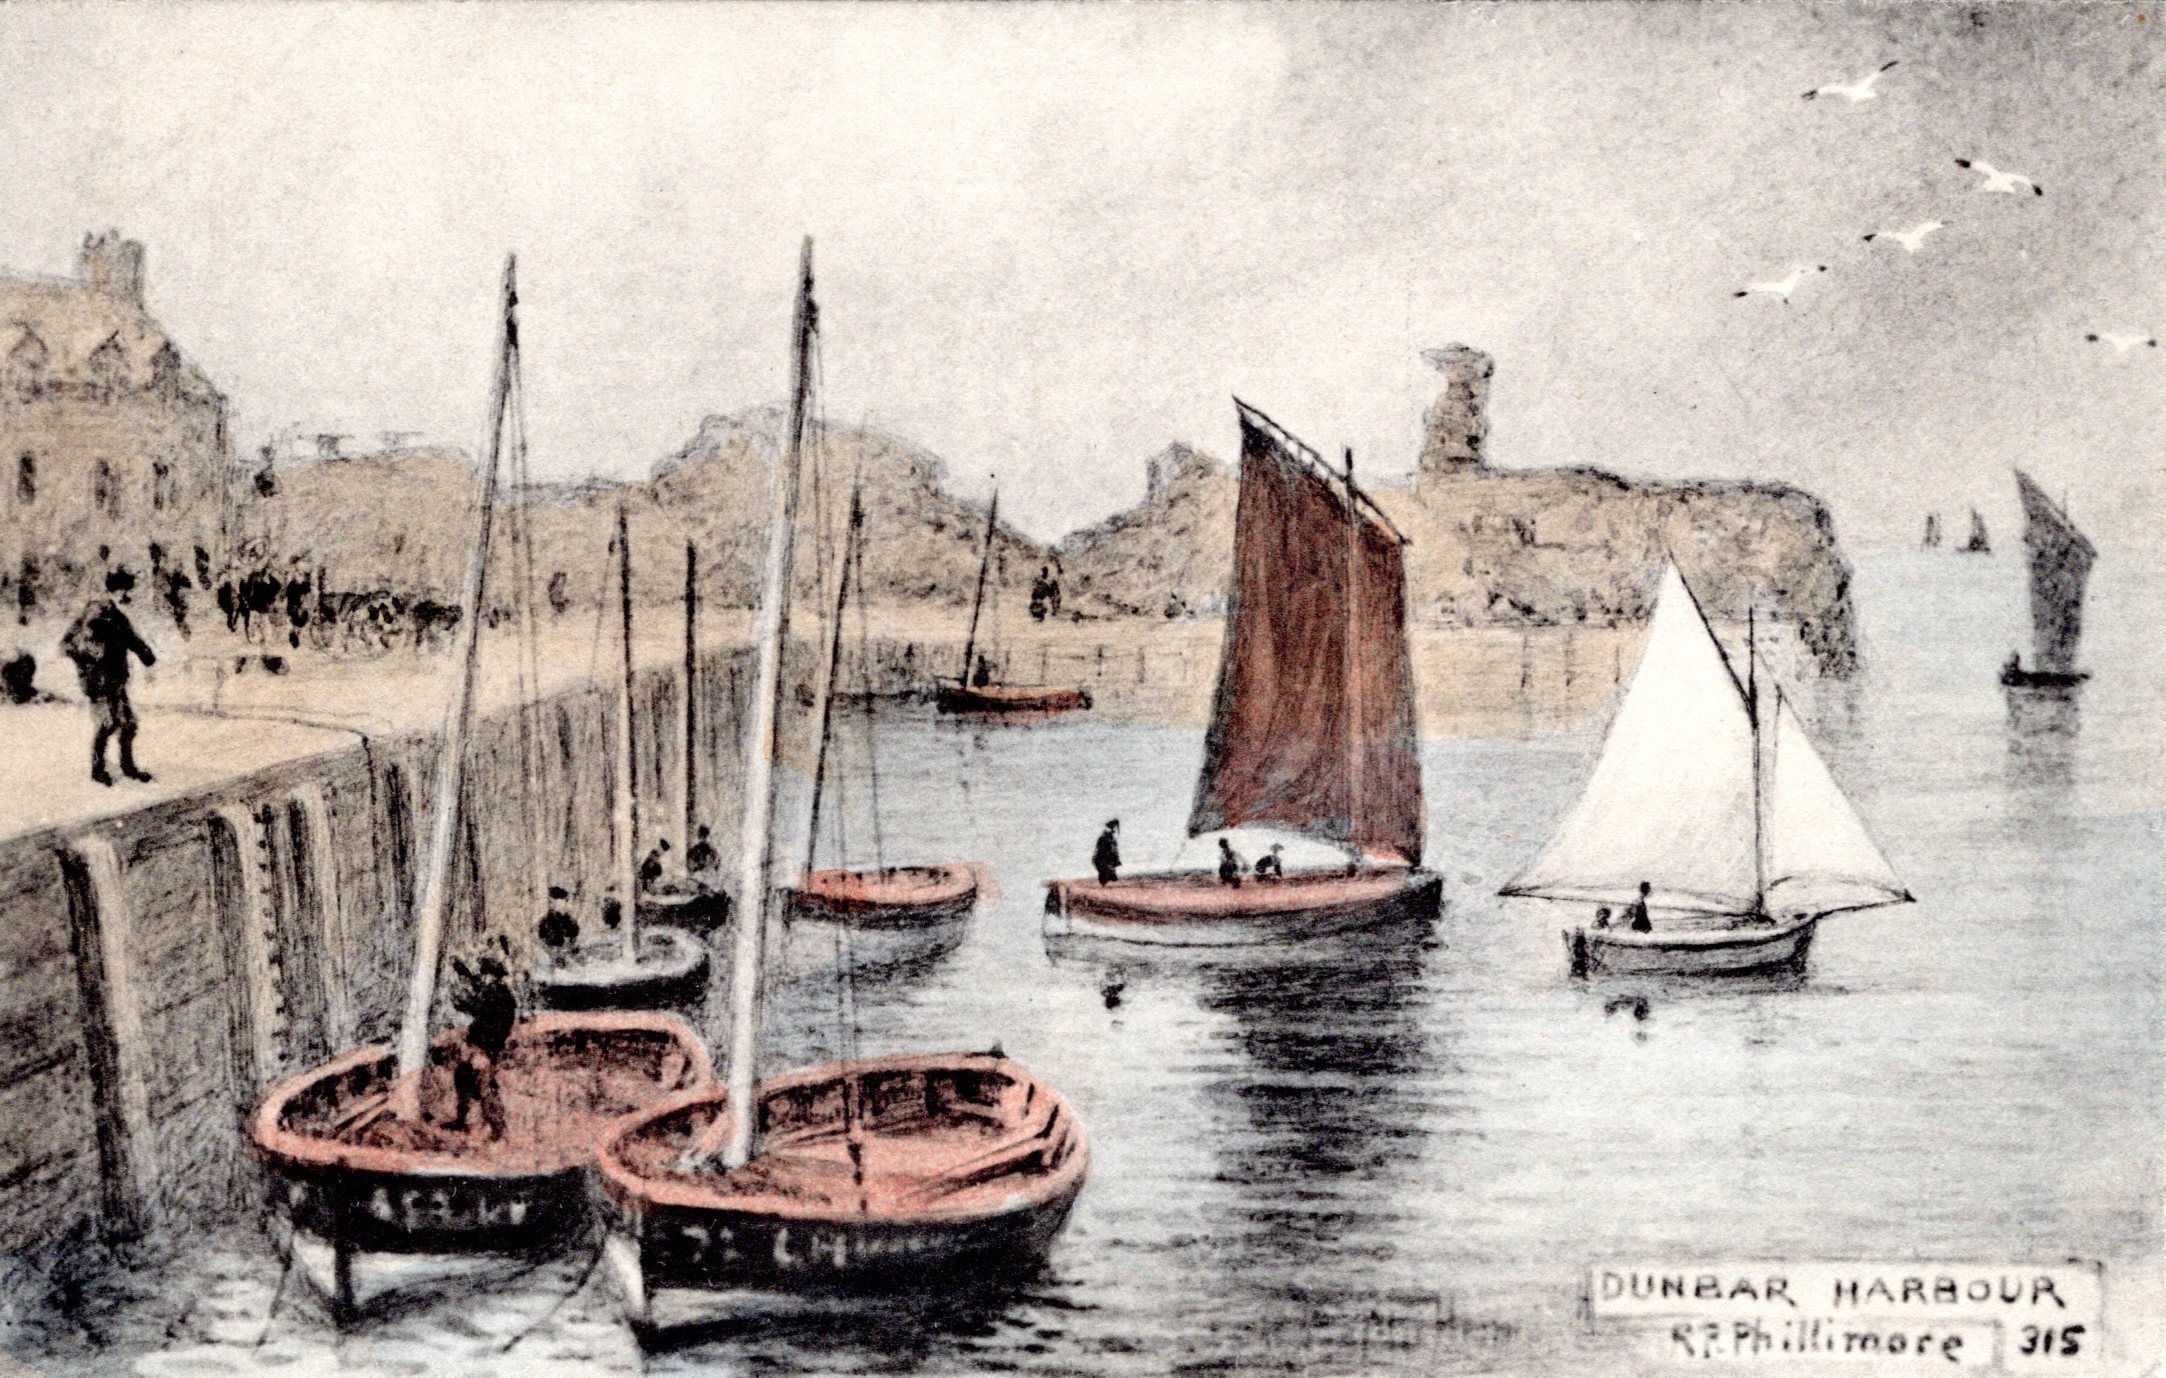 Dunbar Harbour, a card by the celebrated R.P. Phillimore